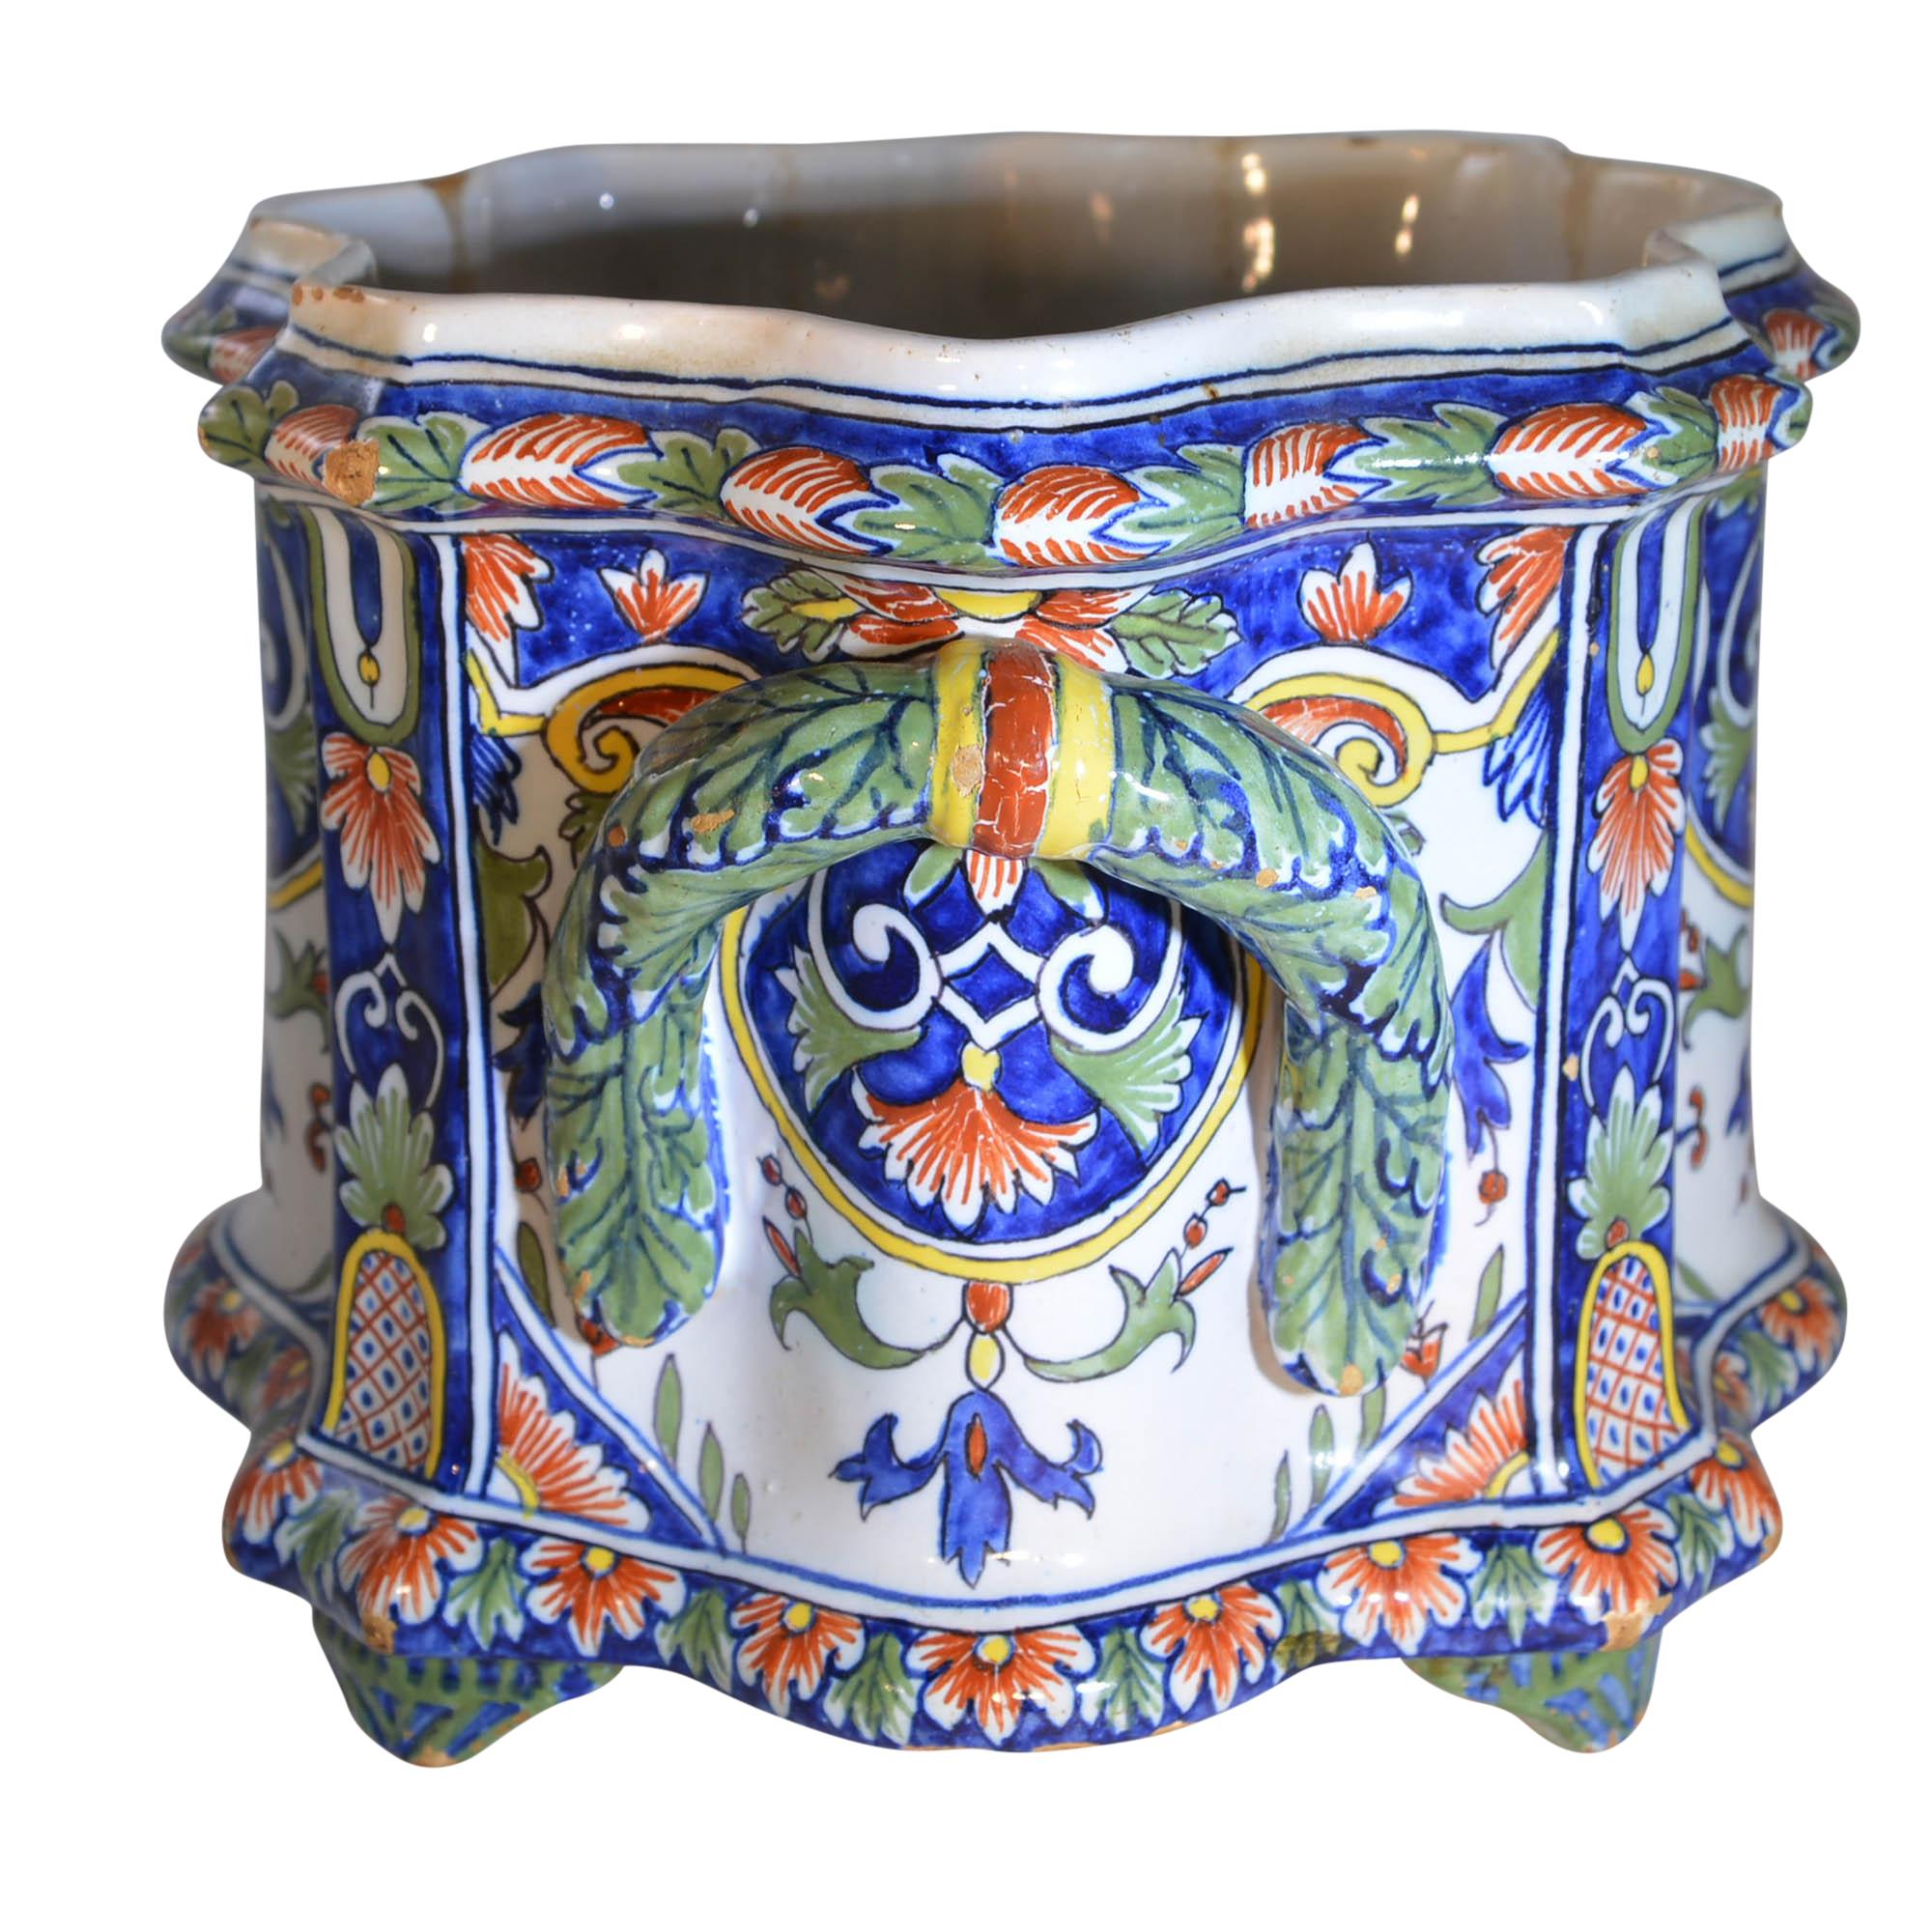 This colorful antique faience cachepot was sculpted in France, circa 1780. The hand painted decorations are carried around the jardinière and handles. The scalloped shape adds to the character of this unique pot. The arabesque motif in blue, red,